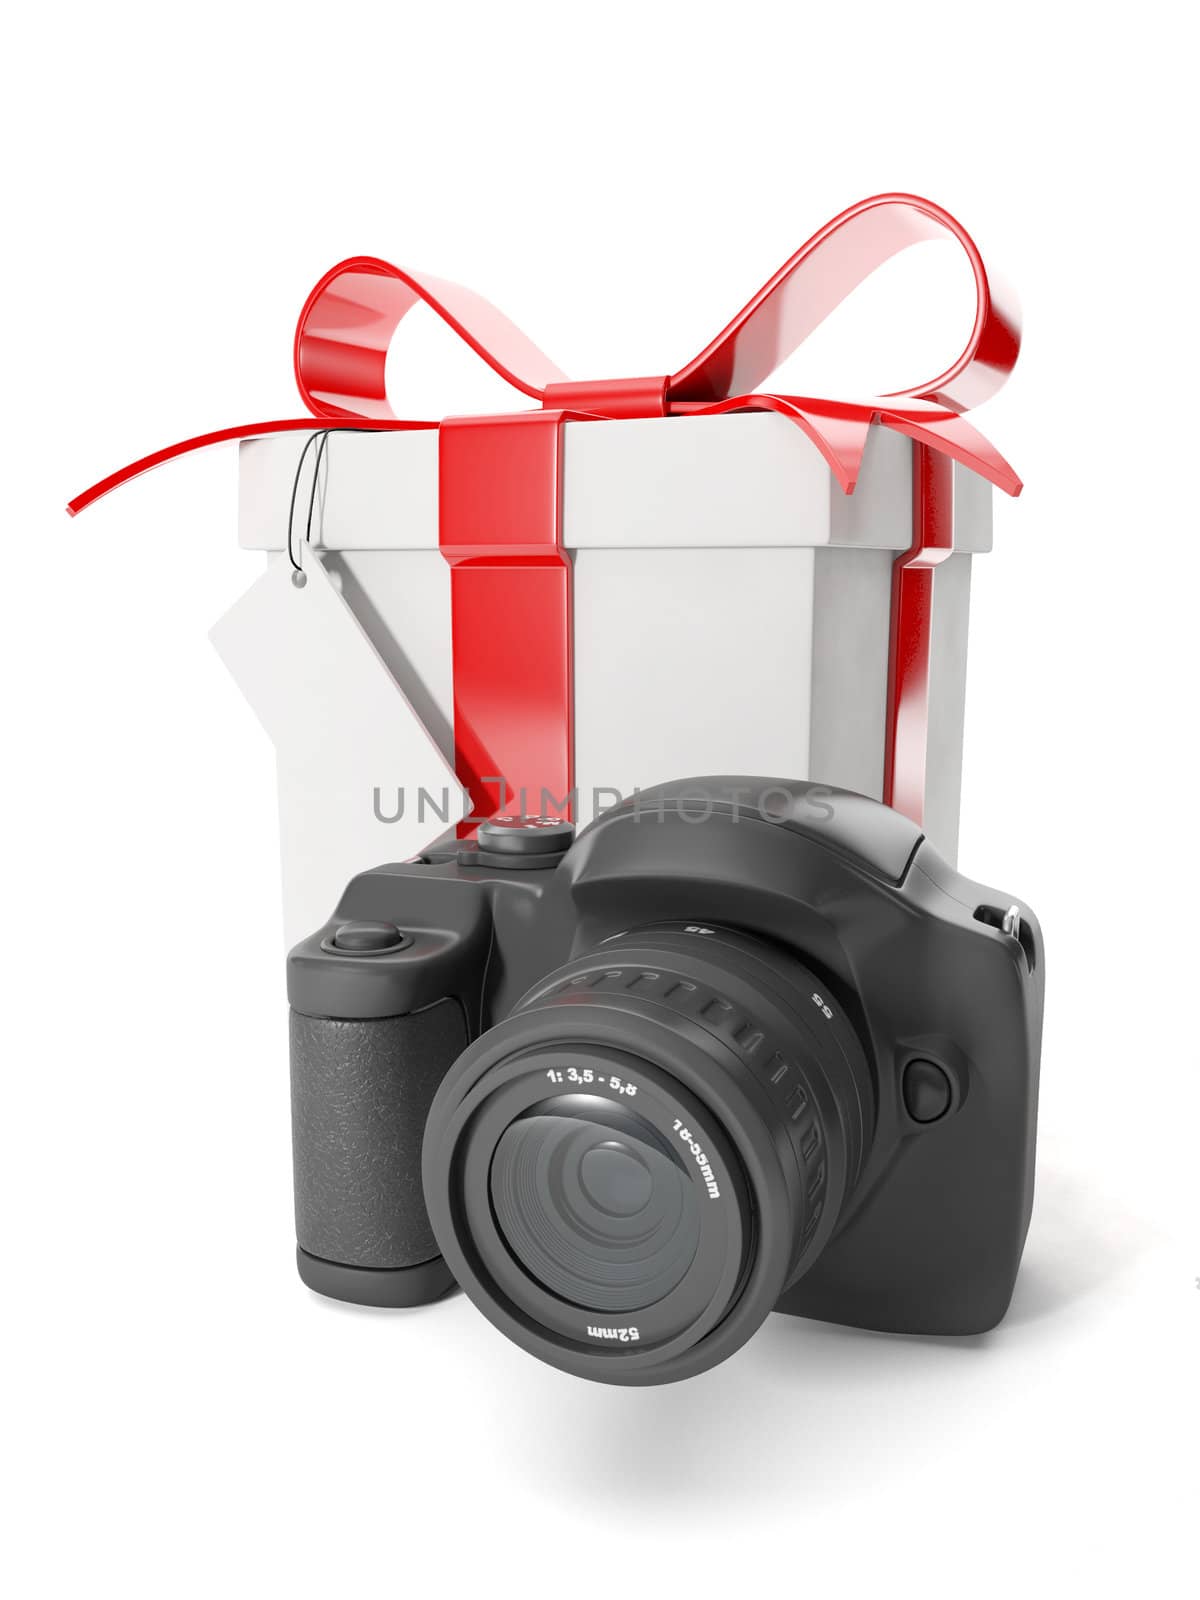 3d illustration: Technology as a gift the prize to win. Camera and a gift box